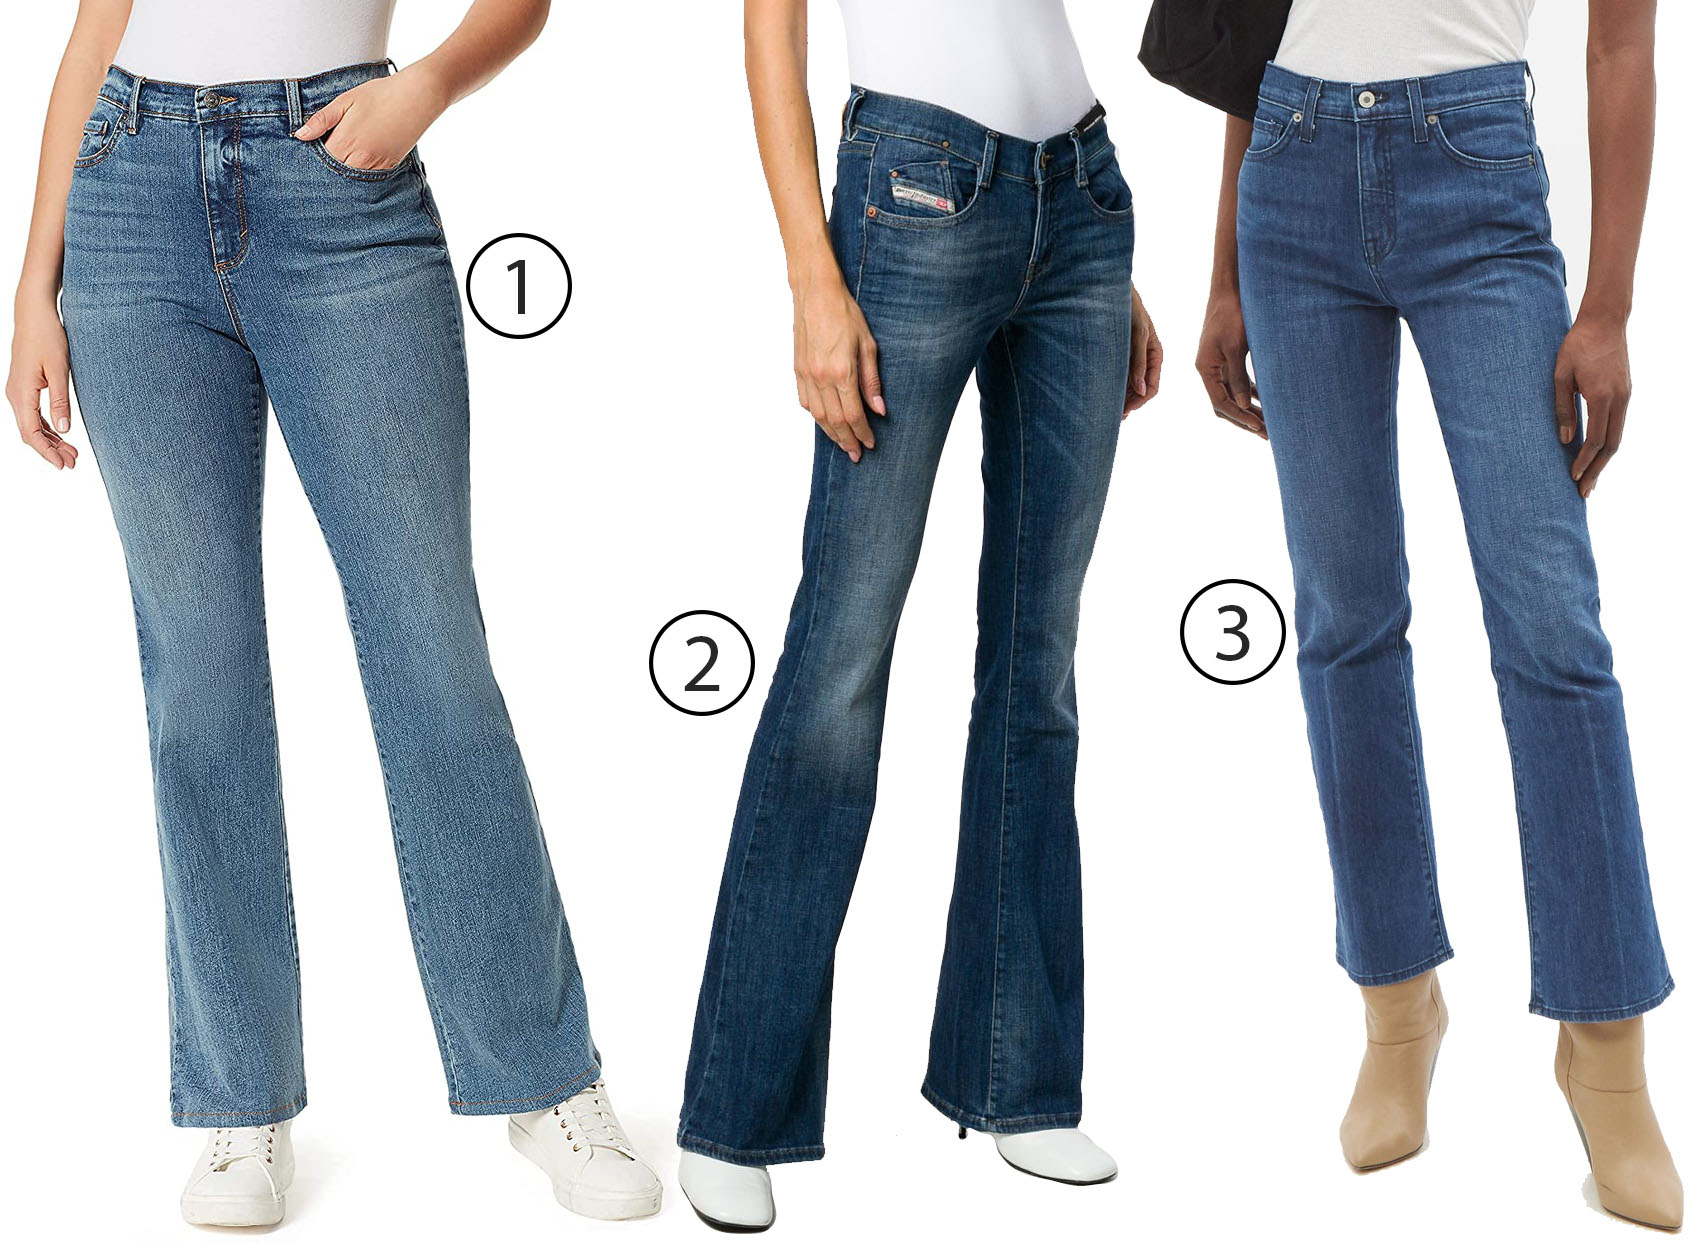 Embrace the '70s vibe with these choices: Gloria Vanderbilt Amanda hr boot cut jeans, Diesel bootcut D-Ebbey jeans, and Nili Lotan high-rise bootcut jeans